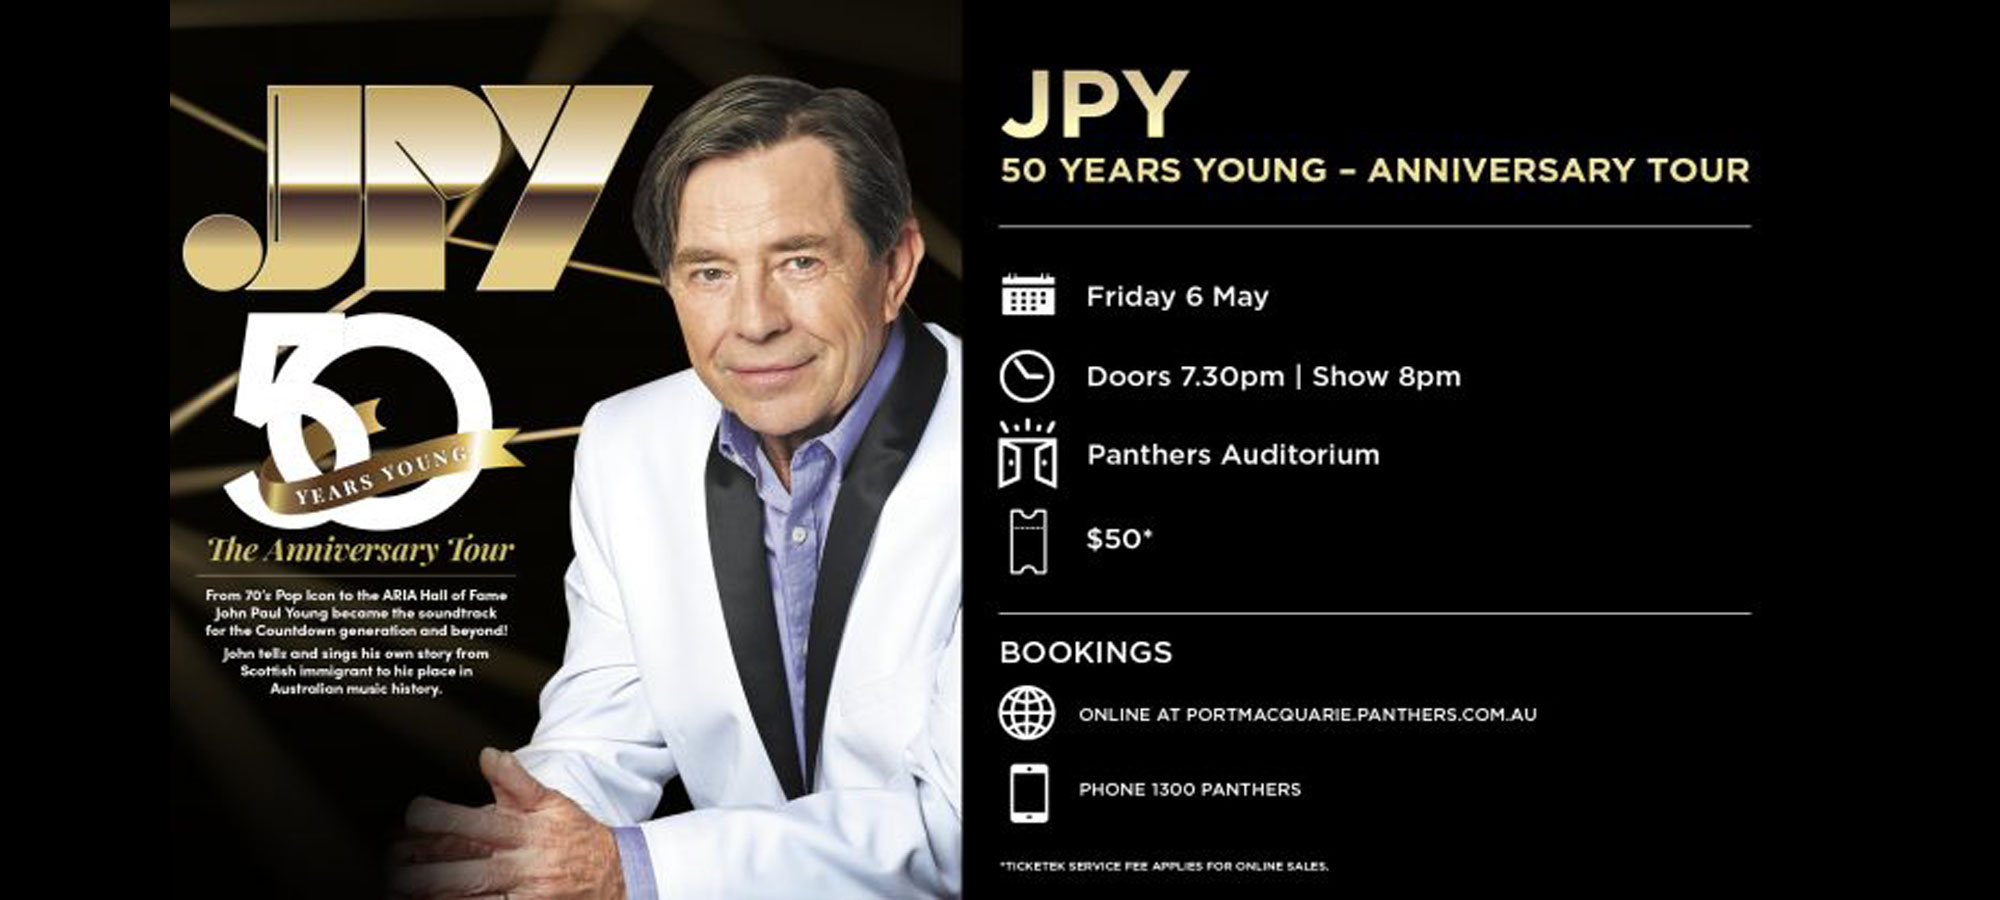 JPY 50 Years Young